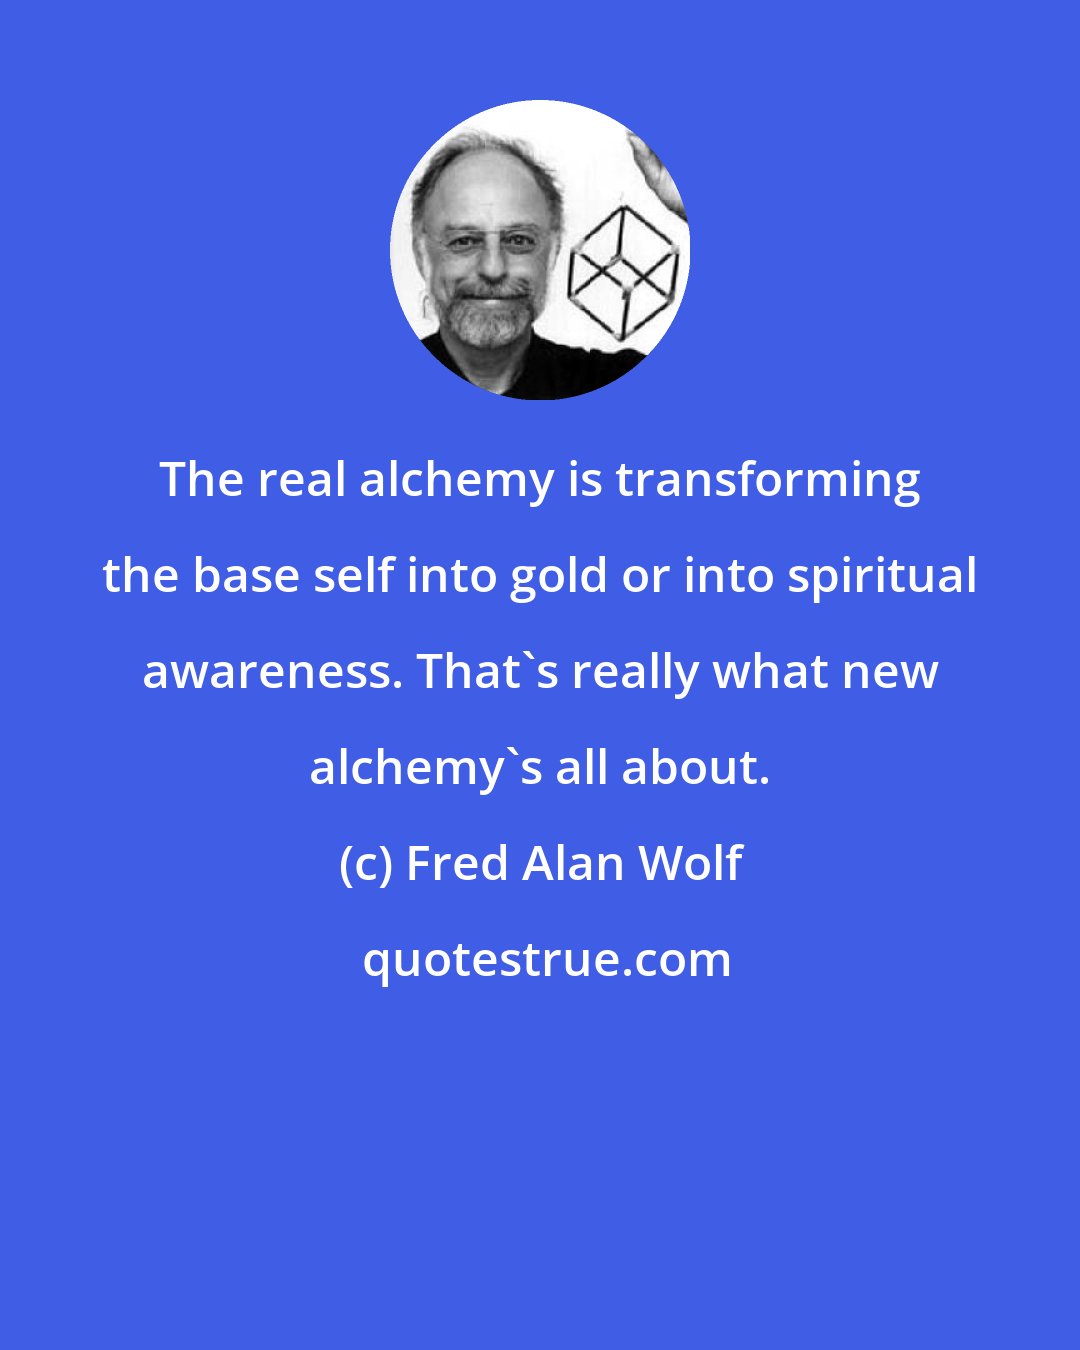 Fred Alan Wolf: The real alchemy is transforming the base self into gold or into spiritual awareness. That's really what new alchemy's all about.